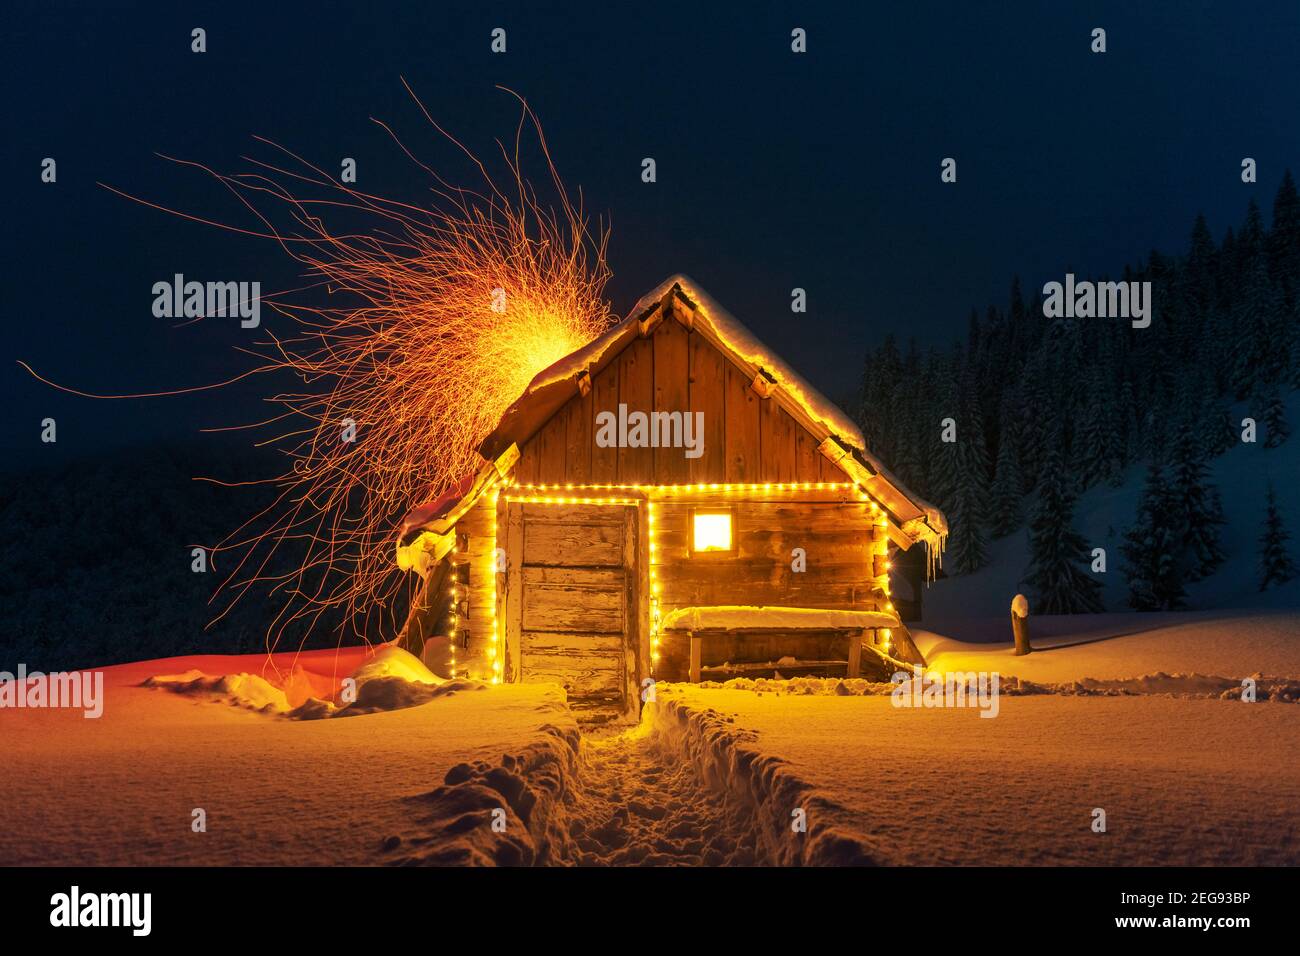 Fantastic winter landscape with glowing wooden cabin in snowy forest. Fire sparks fly out of the chimney. Christmas holiday concept Stock Photo